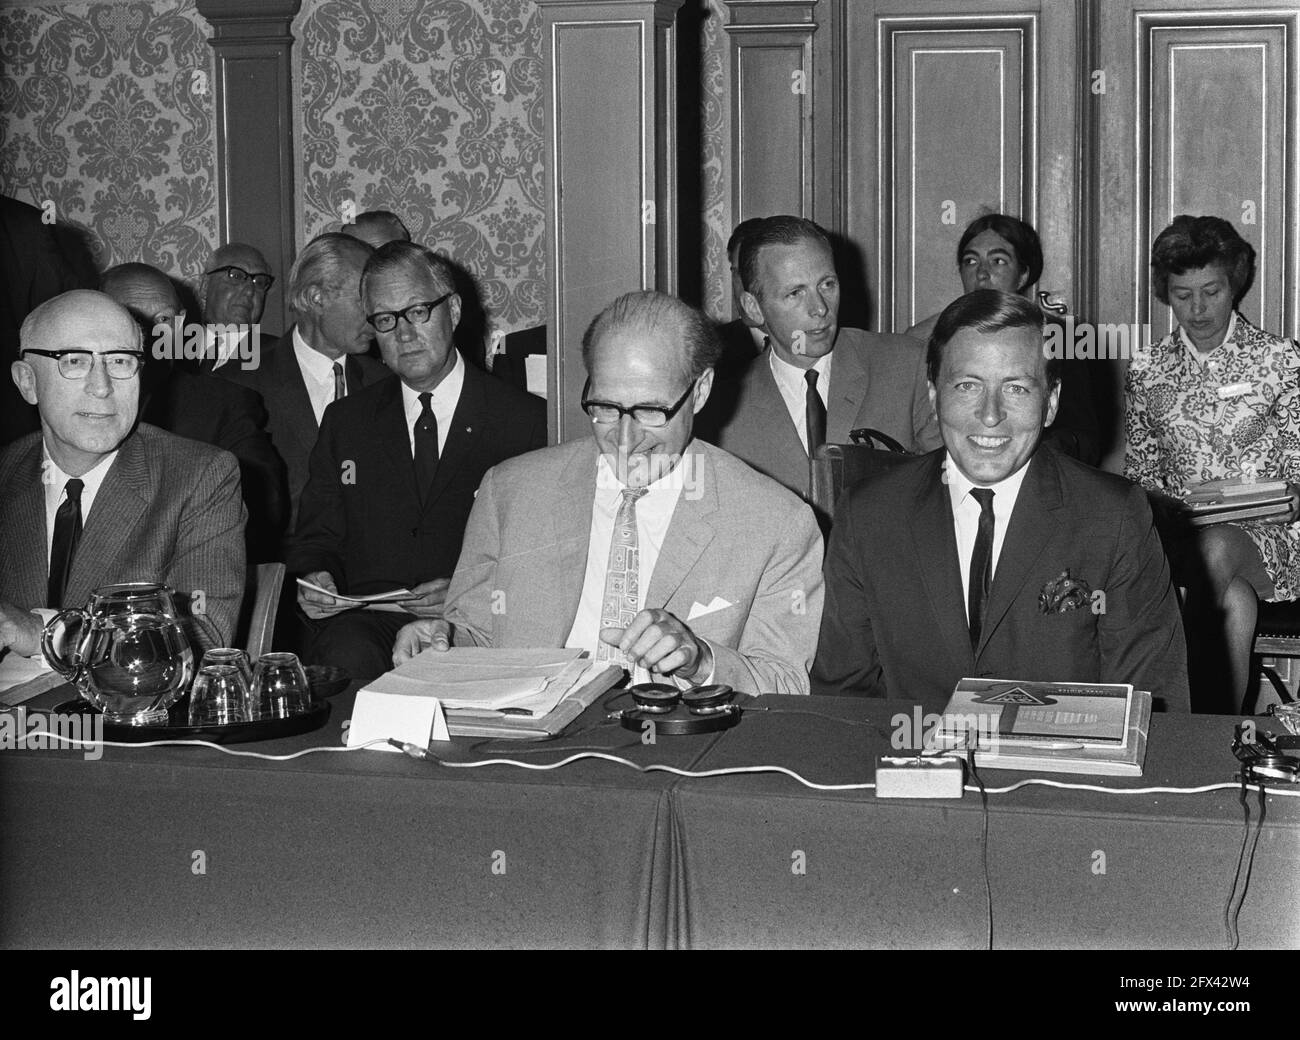 Pr. Claus at 6th Assembly General Europa Nostra in building Kon. NL Acad. Know. Adam, burgm. Samkalden, Min. Schut, Prince Claus, June 12, 1969, The Netherlands, 20th century press agency photo, news to remember, documentary, historic photography 1945-1990, visual stories, human history of the Twentieth Century, capturing moments in time Stock Photo